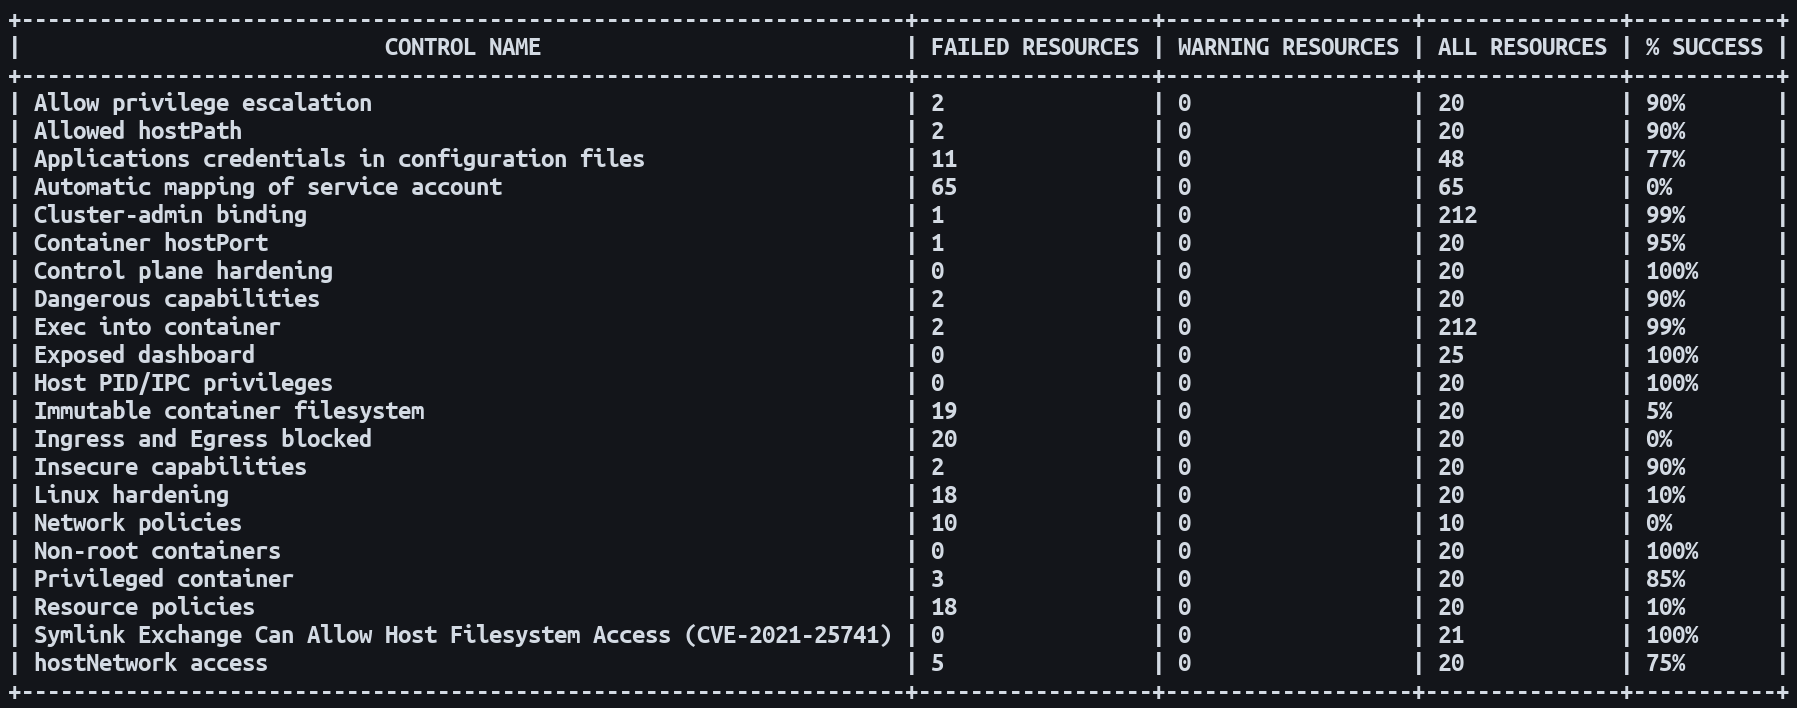 Screenshot of a Kubescape scan summary table